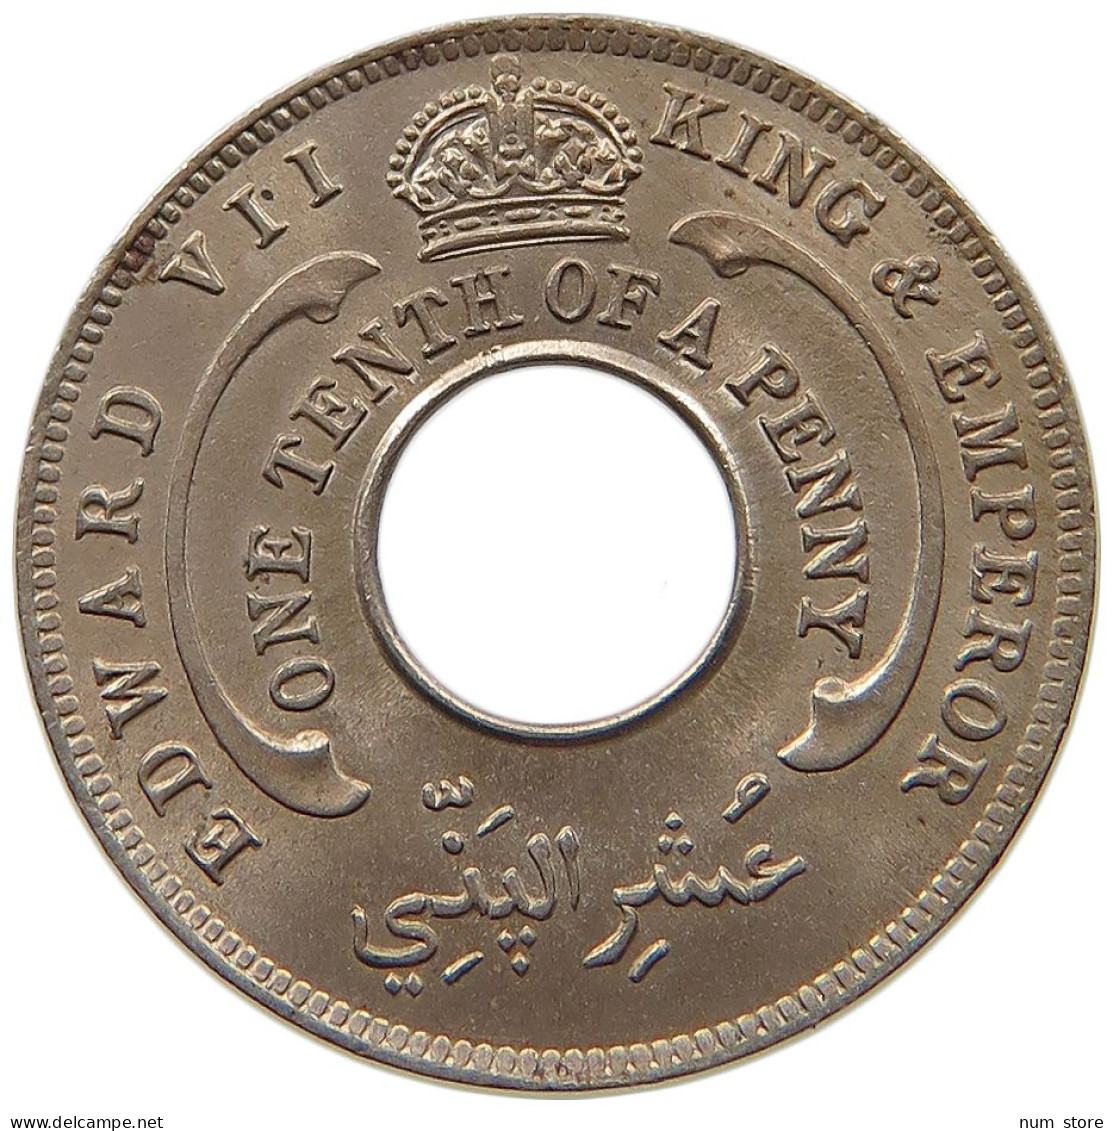 WEST AFRICA 1/10 PENNY 1908 Edward VII., 1901 - 1910 #t113 0163 - Collections